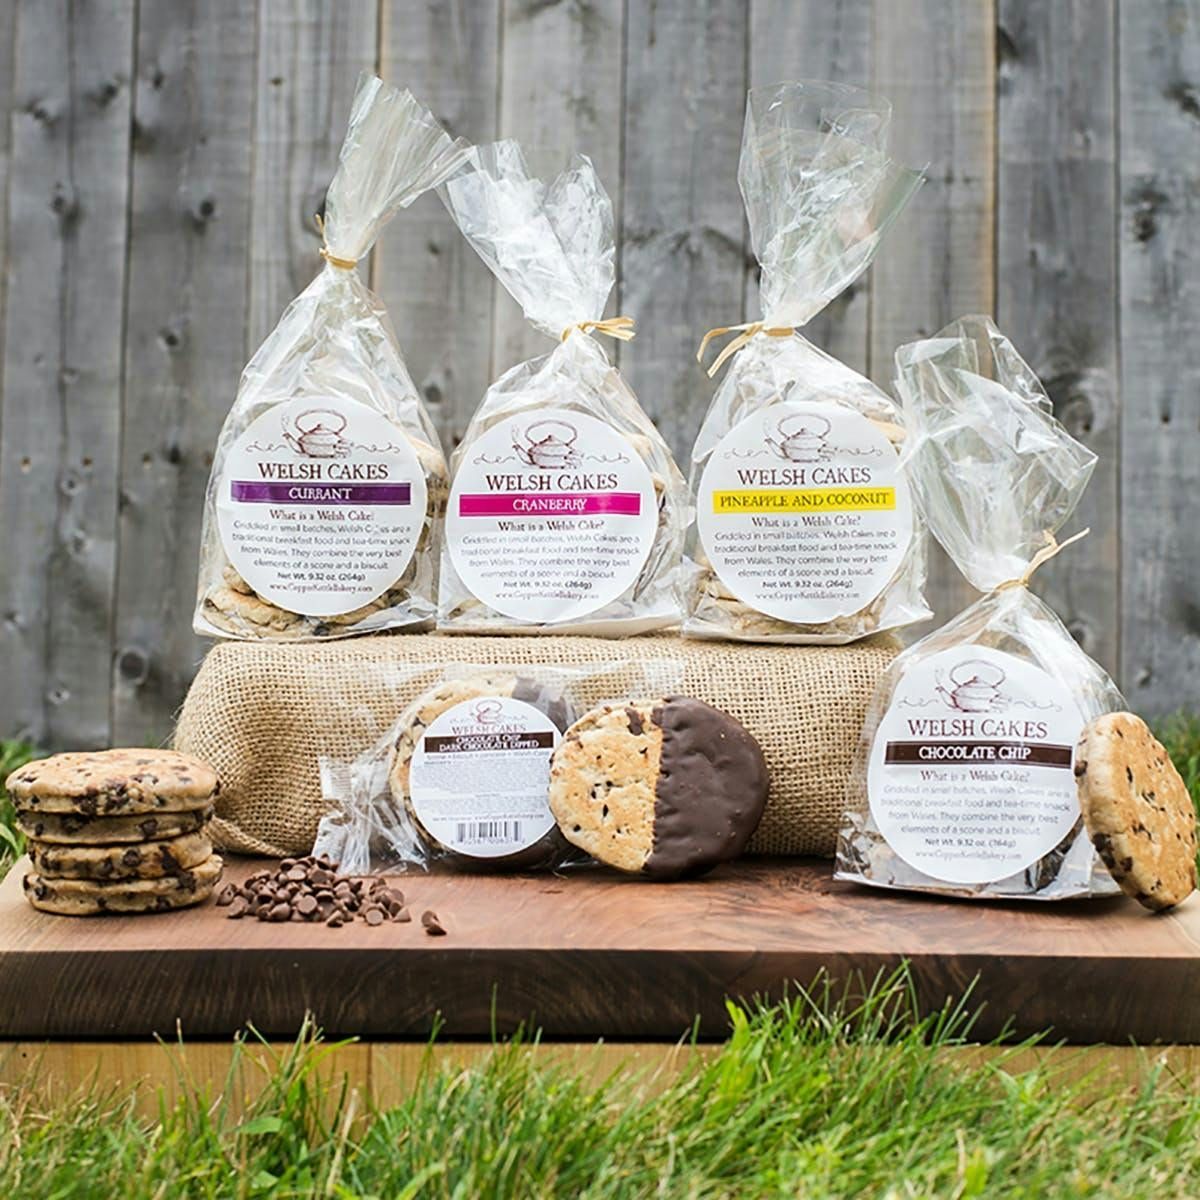 Get ready to treat mom this Mother's Day with a delightful Welsh cakes basket! 🌼🎁 These sweet treats are sure to make her day extra special. #MothersDay #WelshCakes

Choose Your Own Welsh Cake - 6 Pack by Copper Kettle Bakery | Goldbelly buff.ly/3Rgacpa